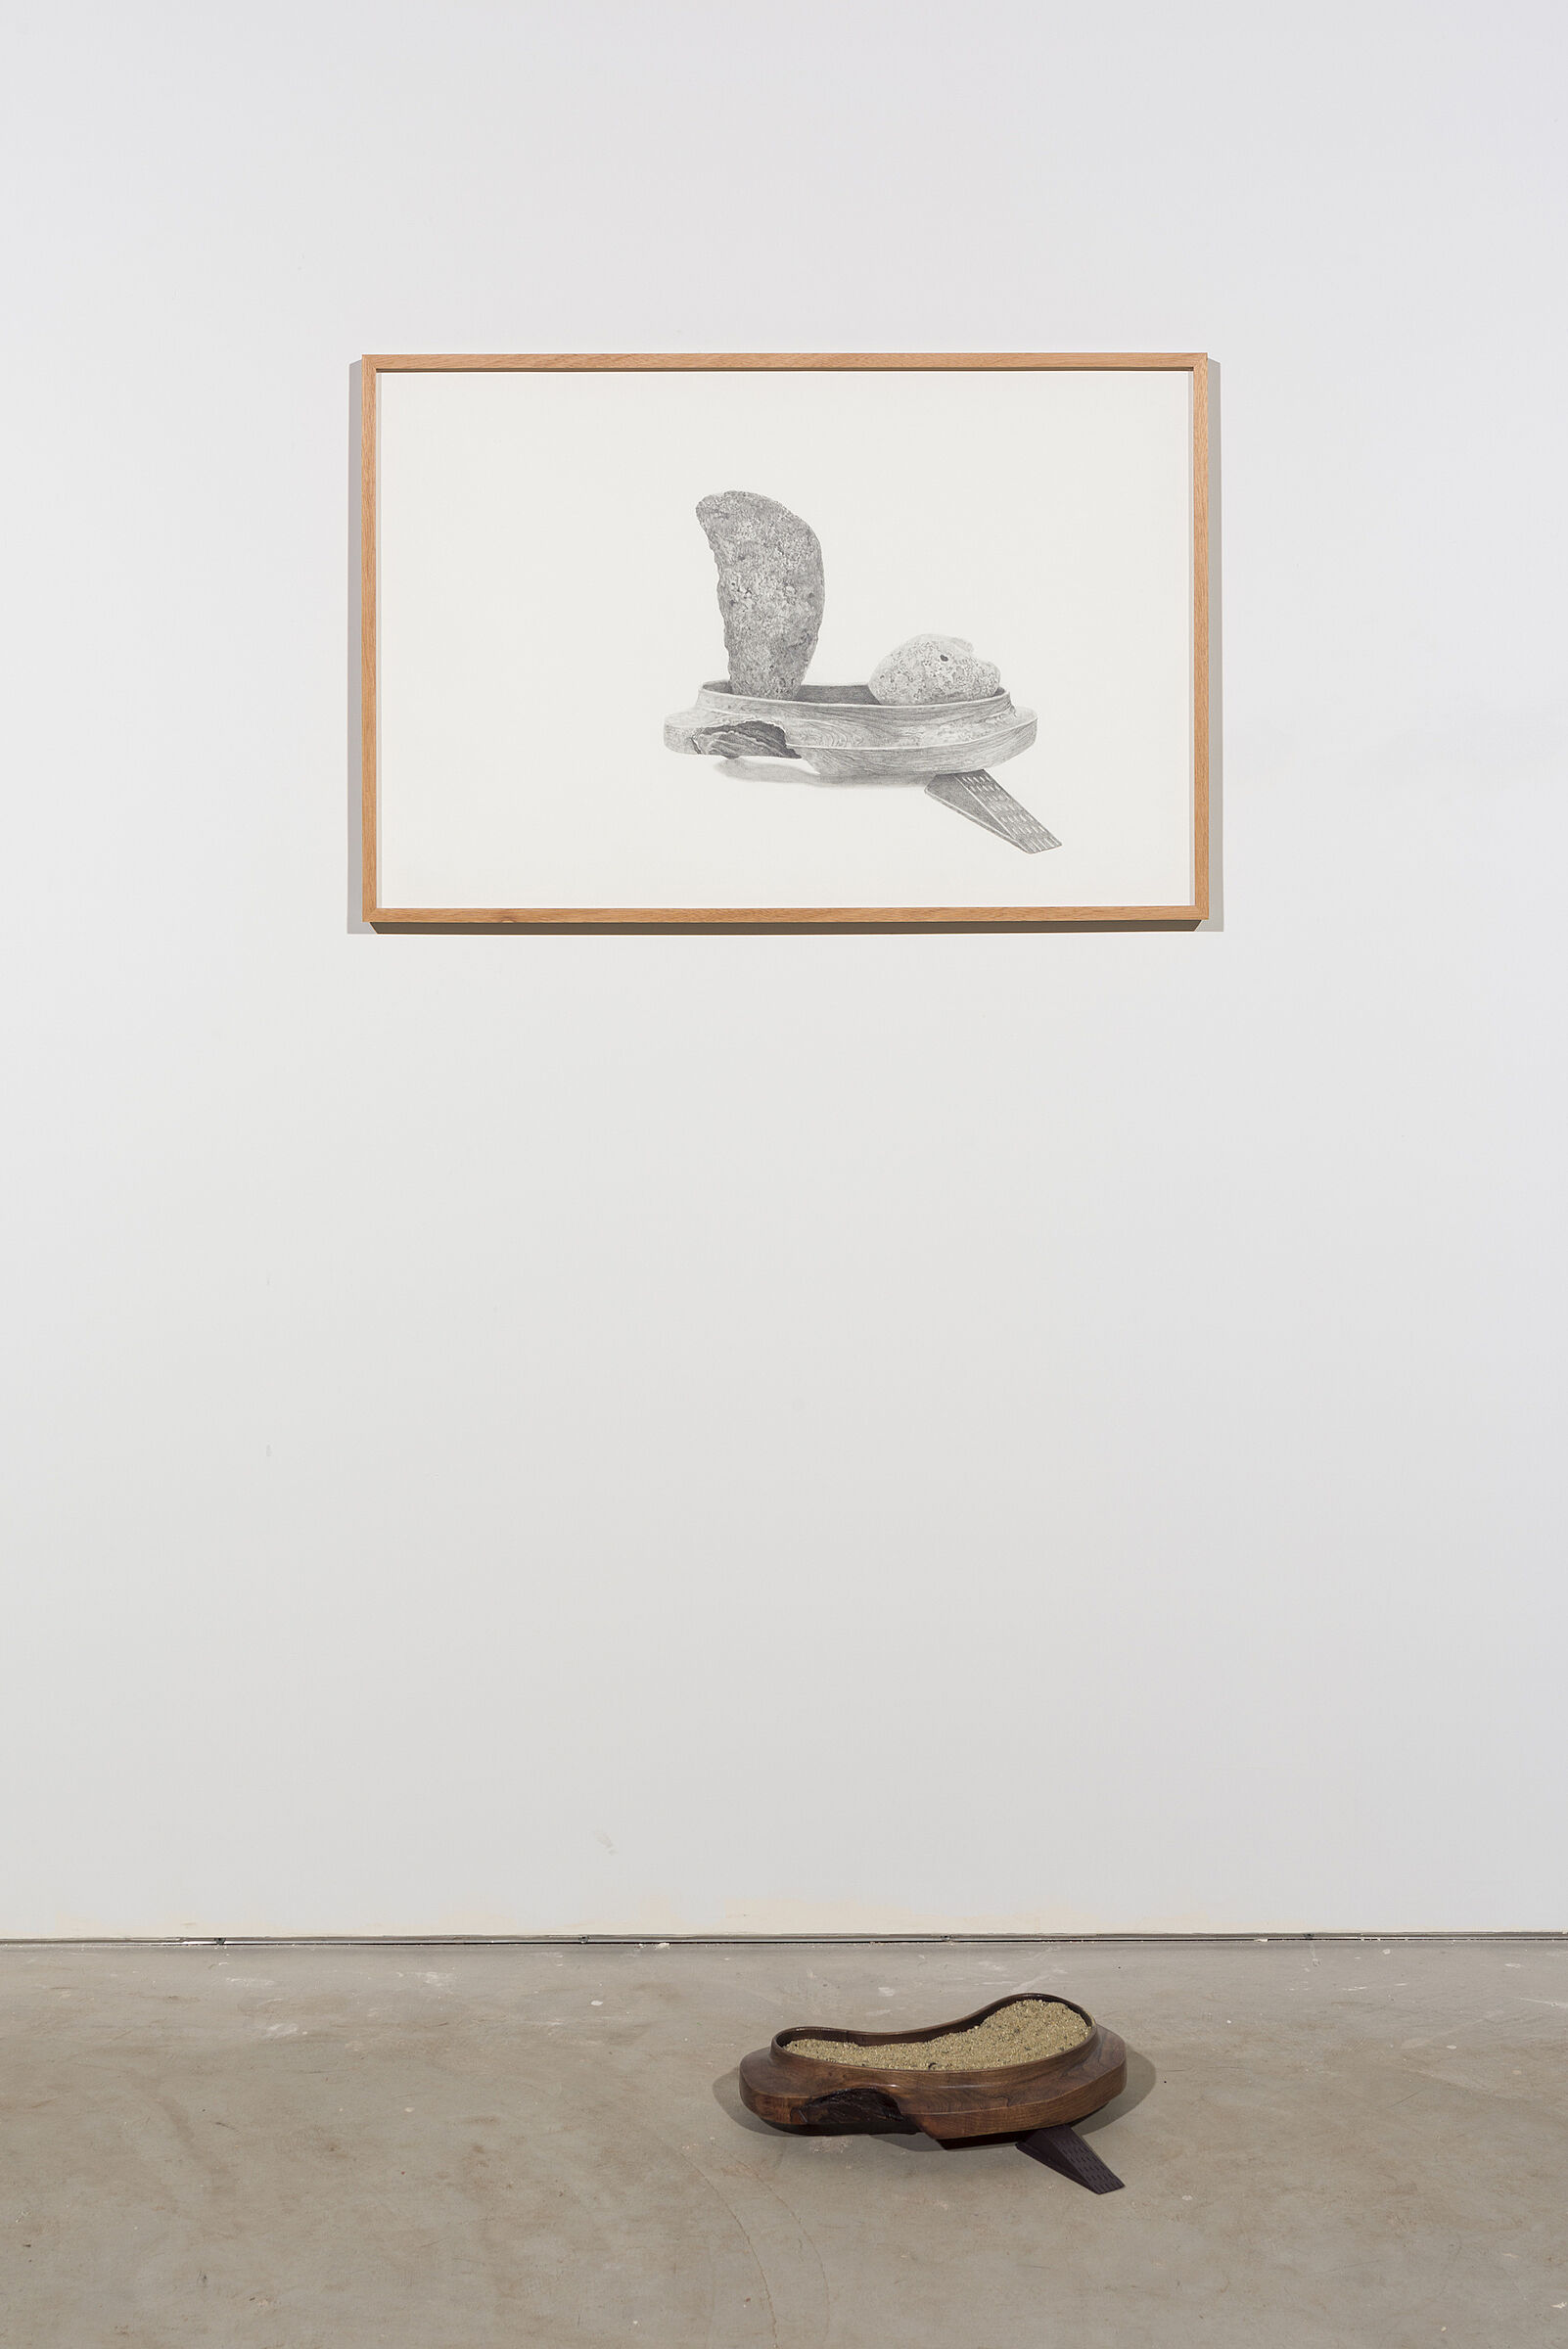 An installation including a black-and-white drawing on the wall and small sculpture on the ground before it.